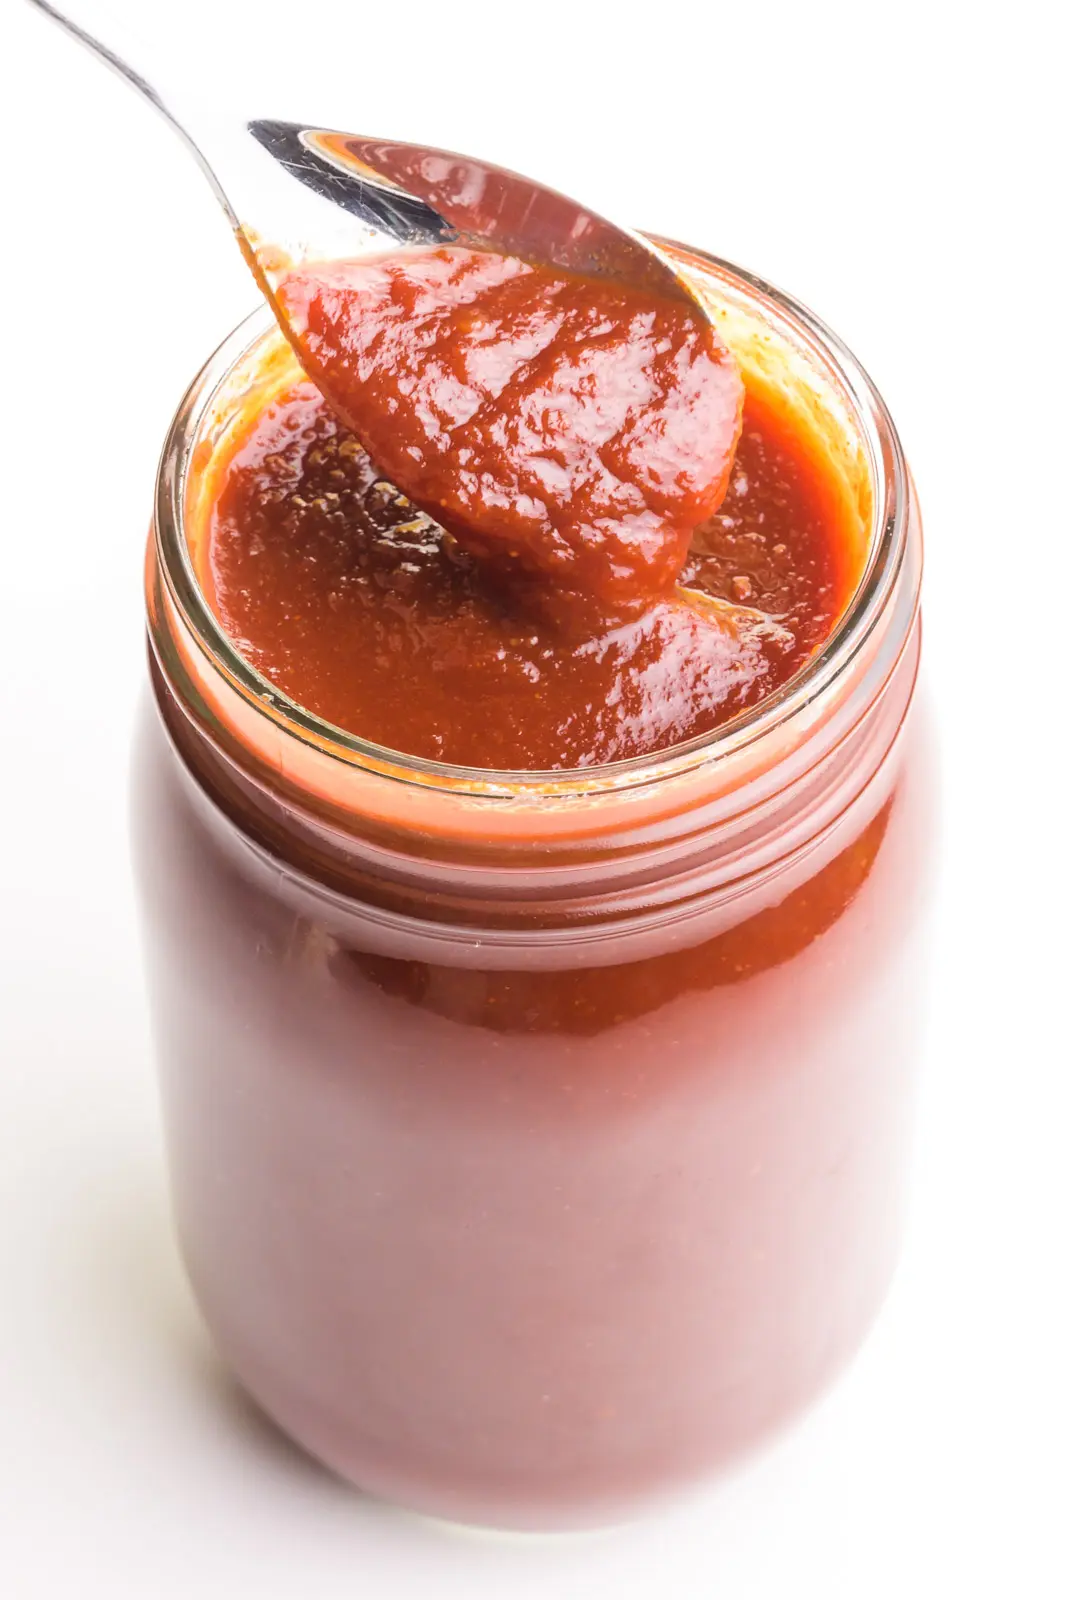 A spoon holds vegan bbq sauce over a glass jar full of the sauce.